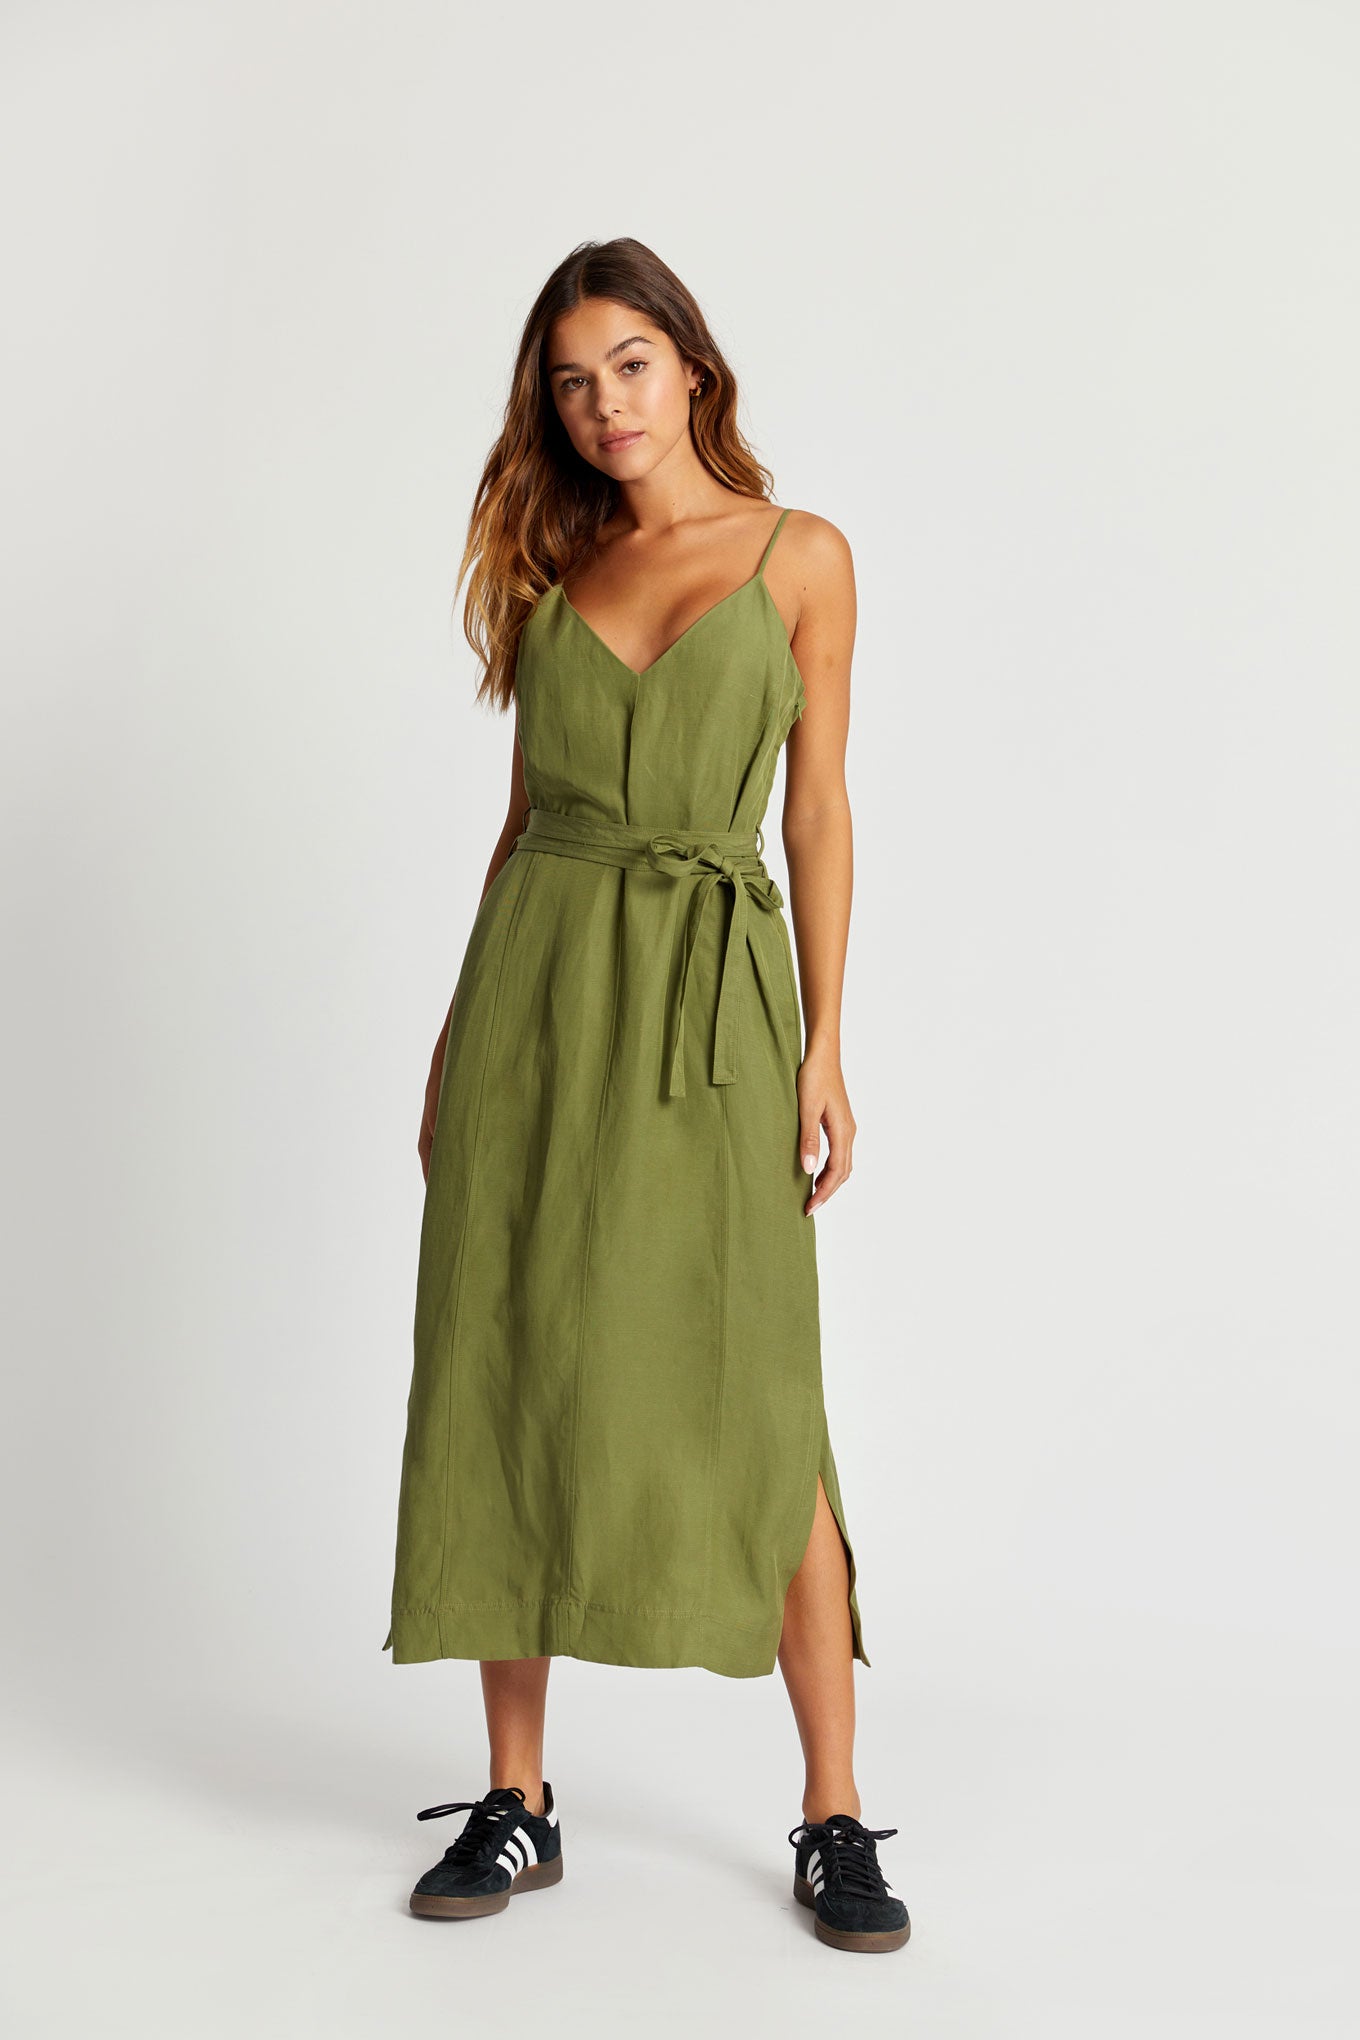 Green dress IMAN made of tencel and linen from Komodo